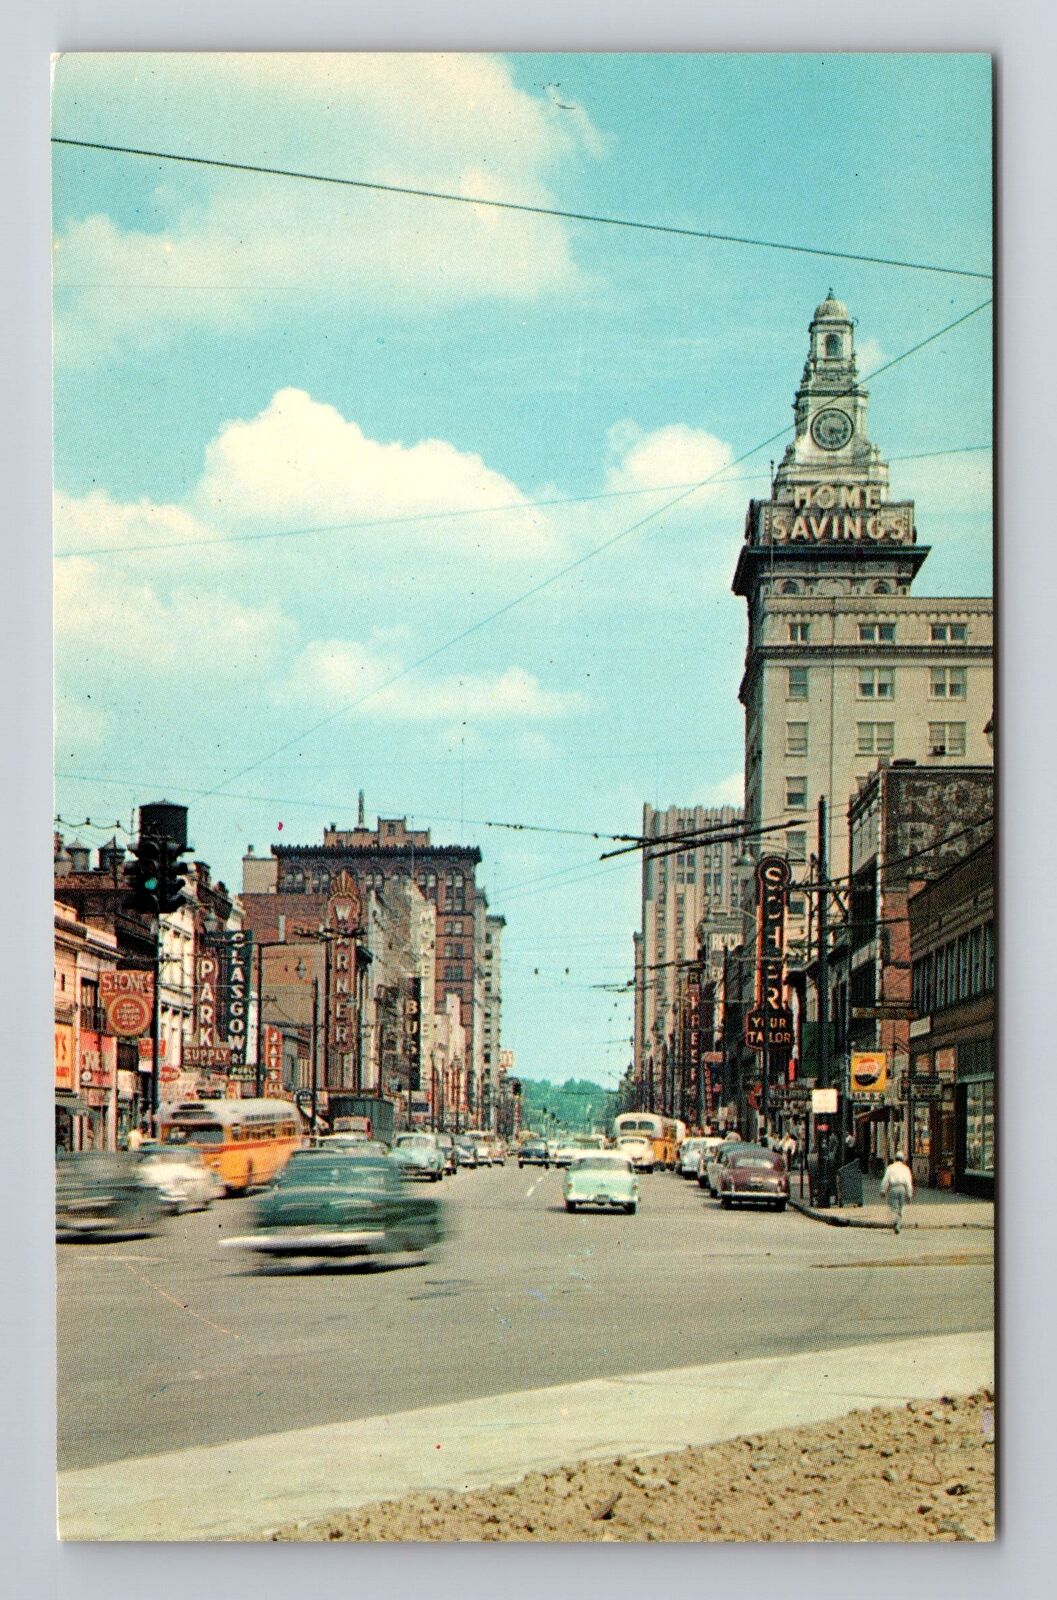 Youngstown OH-Ohio, Home Savings Loan Clock Tower, Antique Vintage Postcard